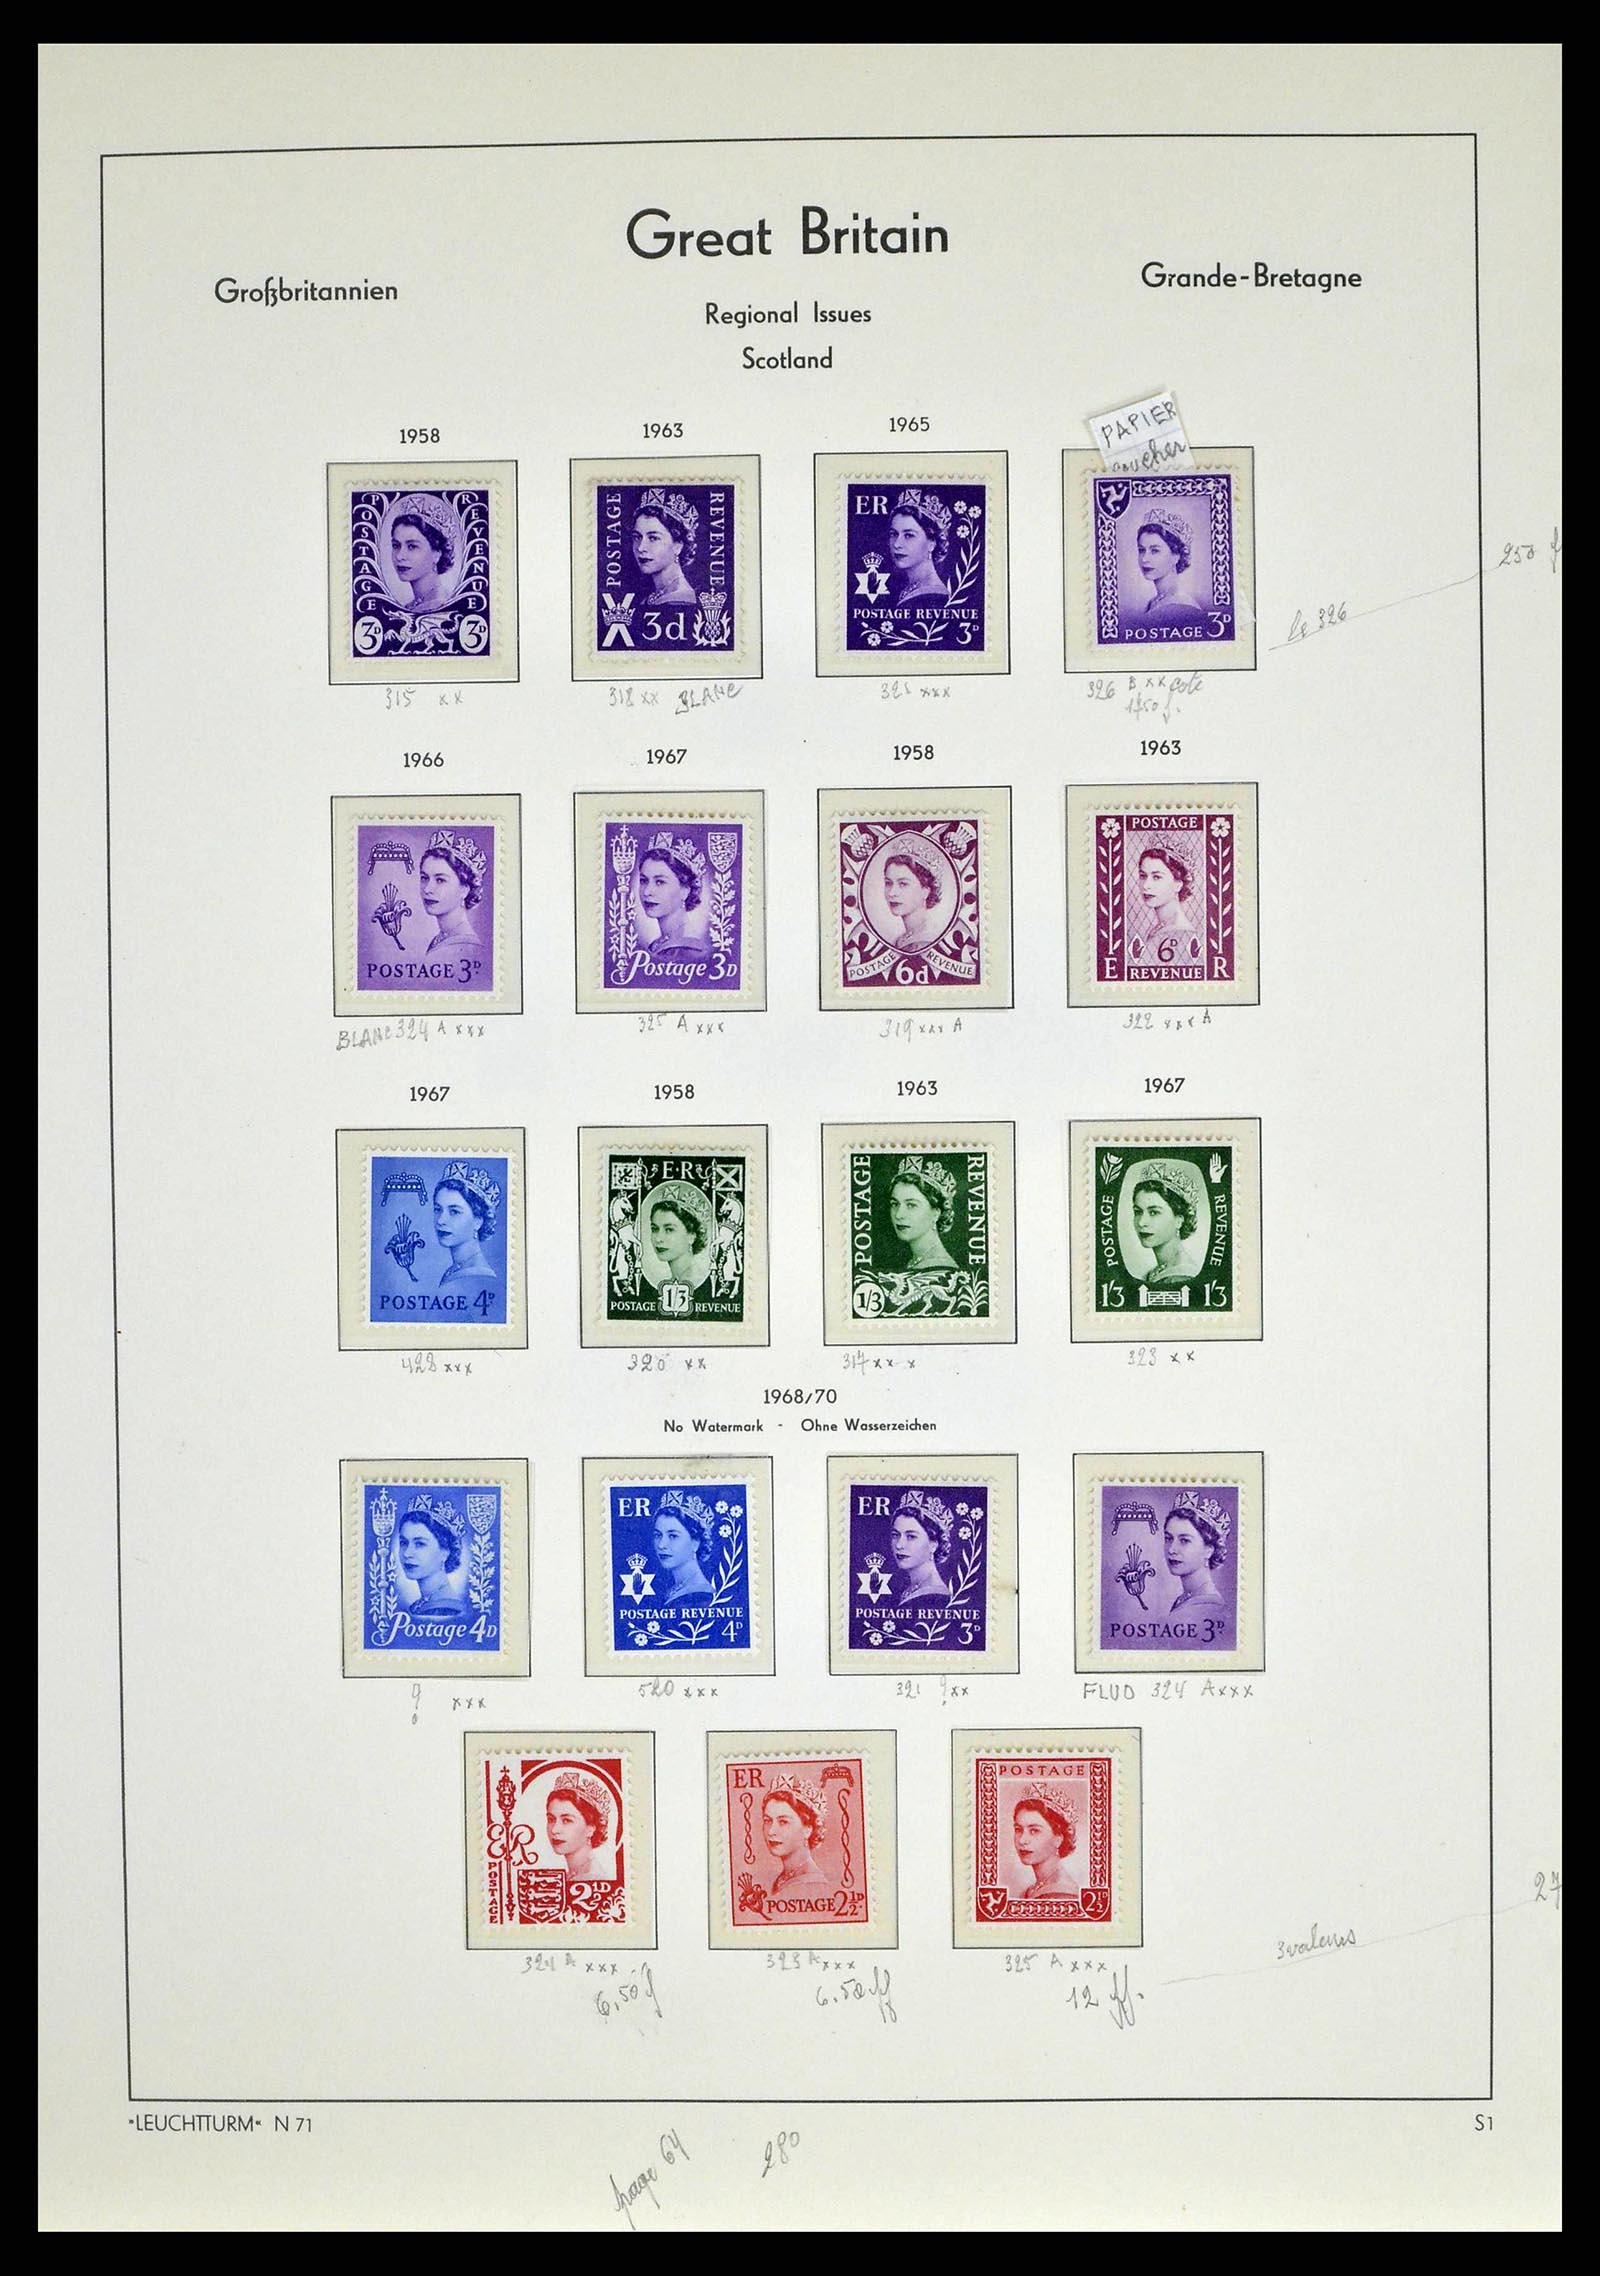 38649 0068 - Stamp collection 38649 Great Britain 1840-1971.